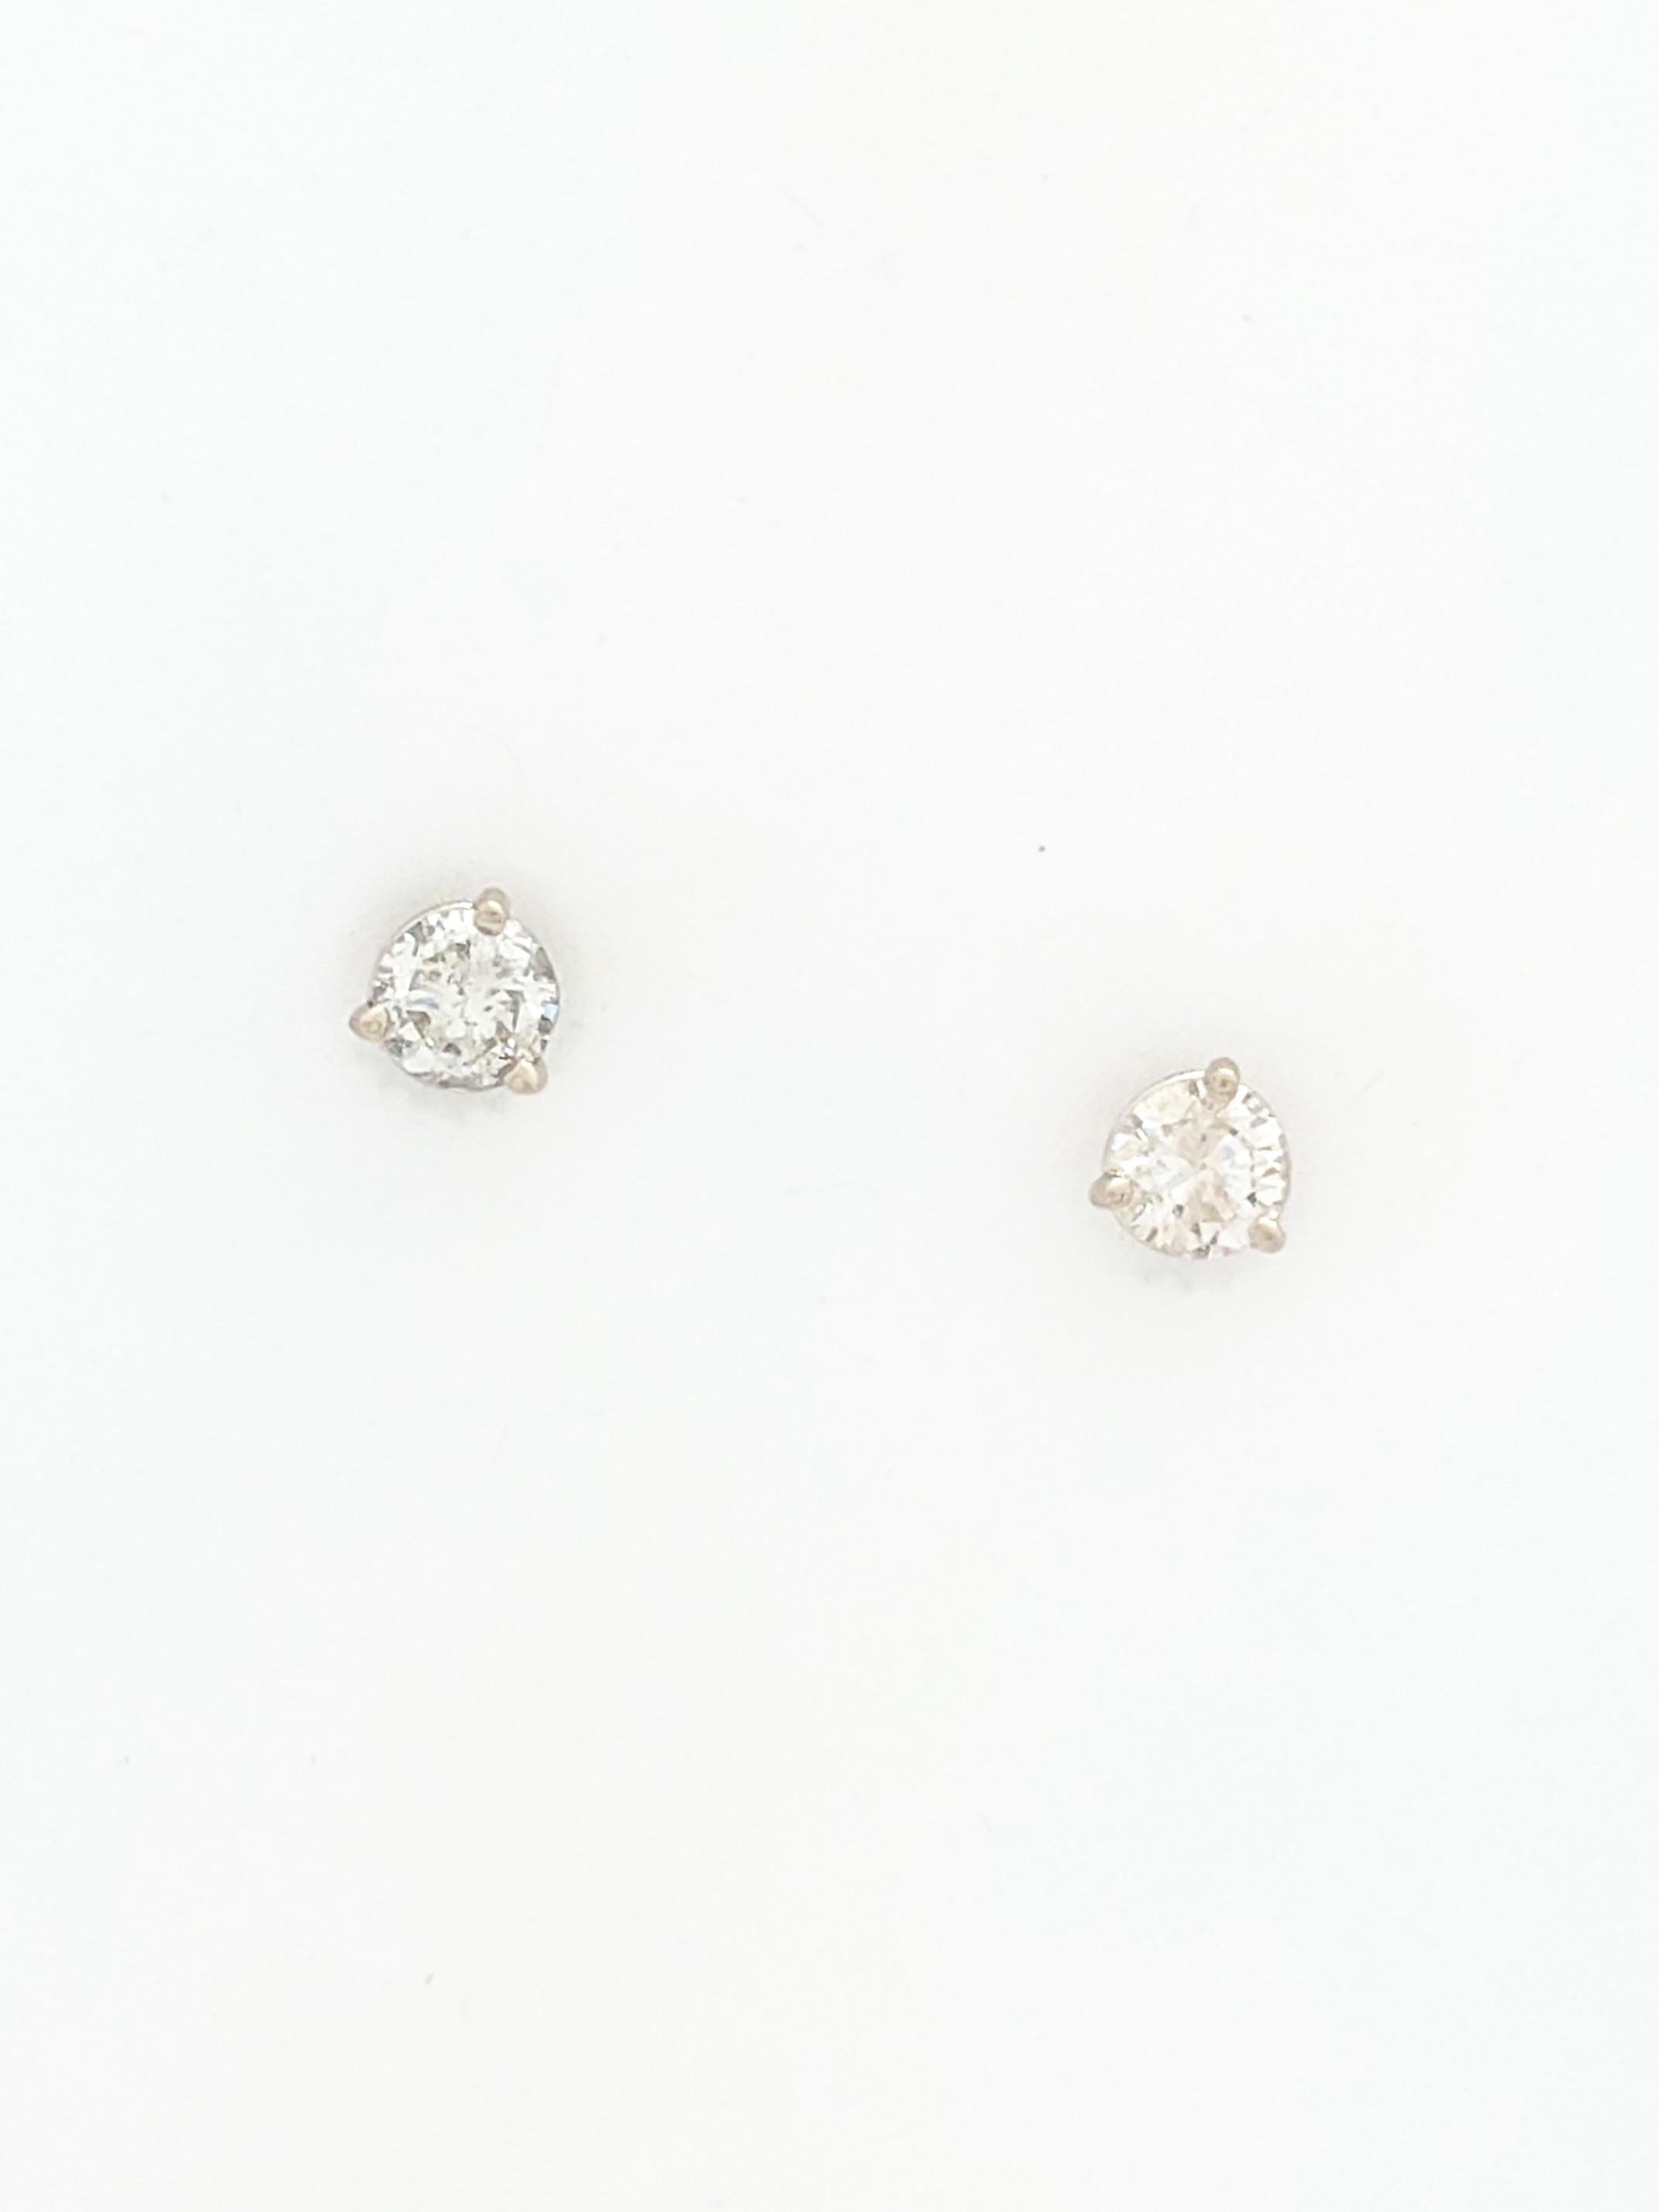 14K White Gold Diamond Stud Earrings .50tcw I1/I 

You are viewing a Beautiful Pair of Diamond Stud Earrings.

These earrings are crafted from 14k white gold and weighs .9 grams. Each earring features (1) .25ct natural round diamond which measures